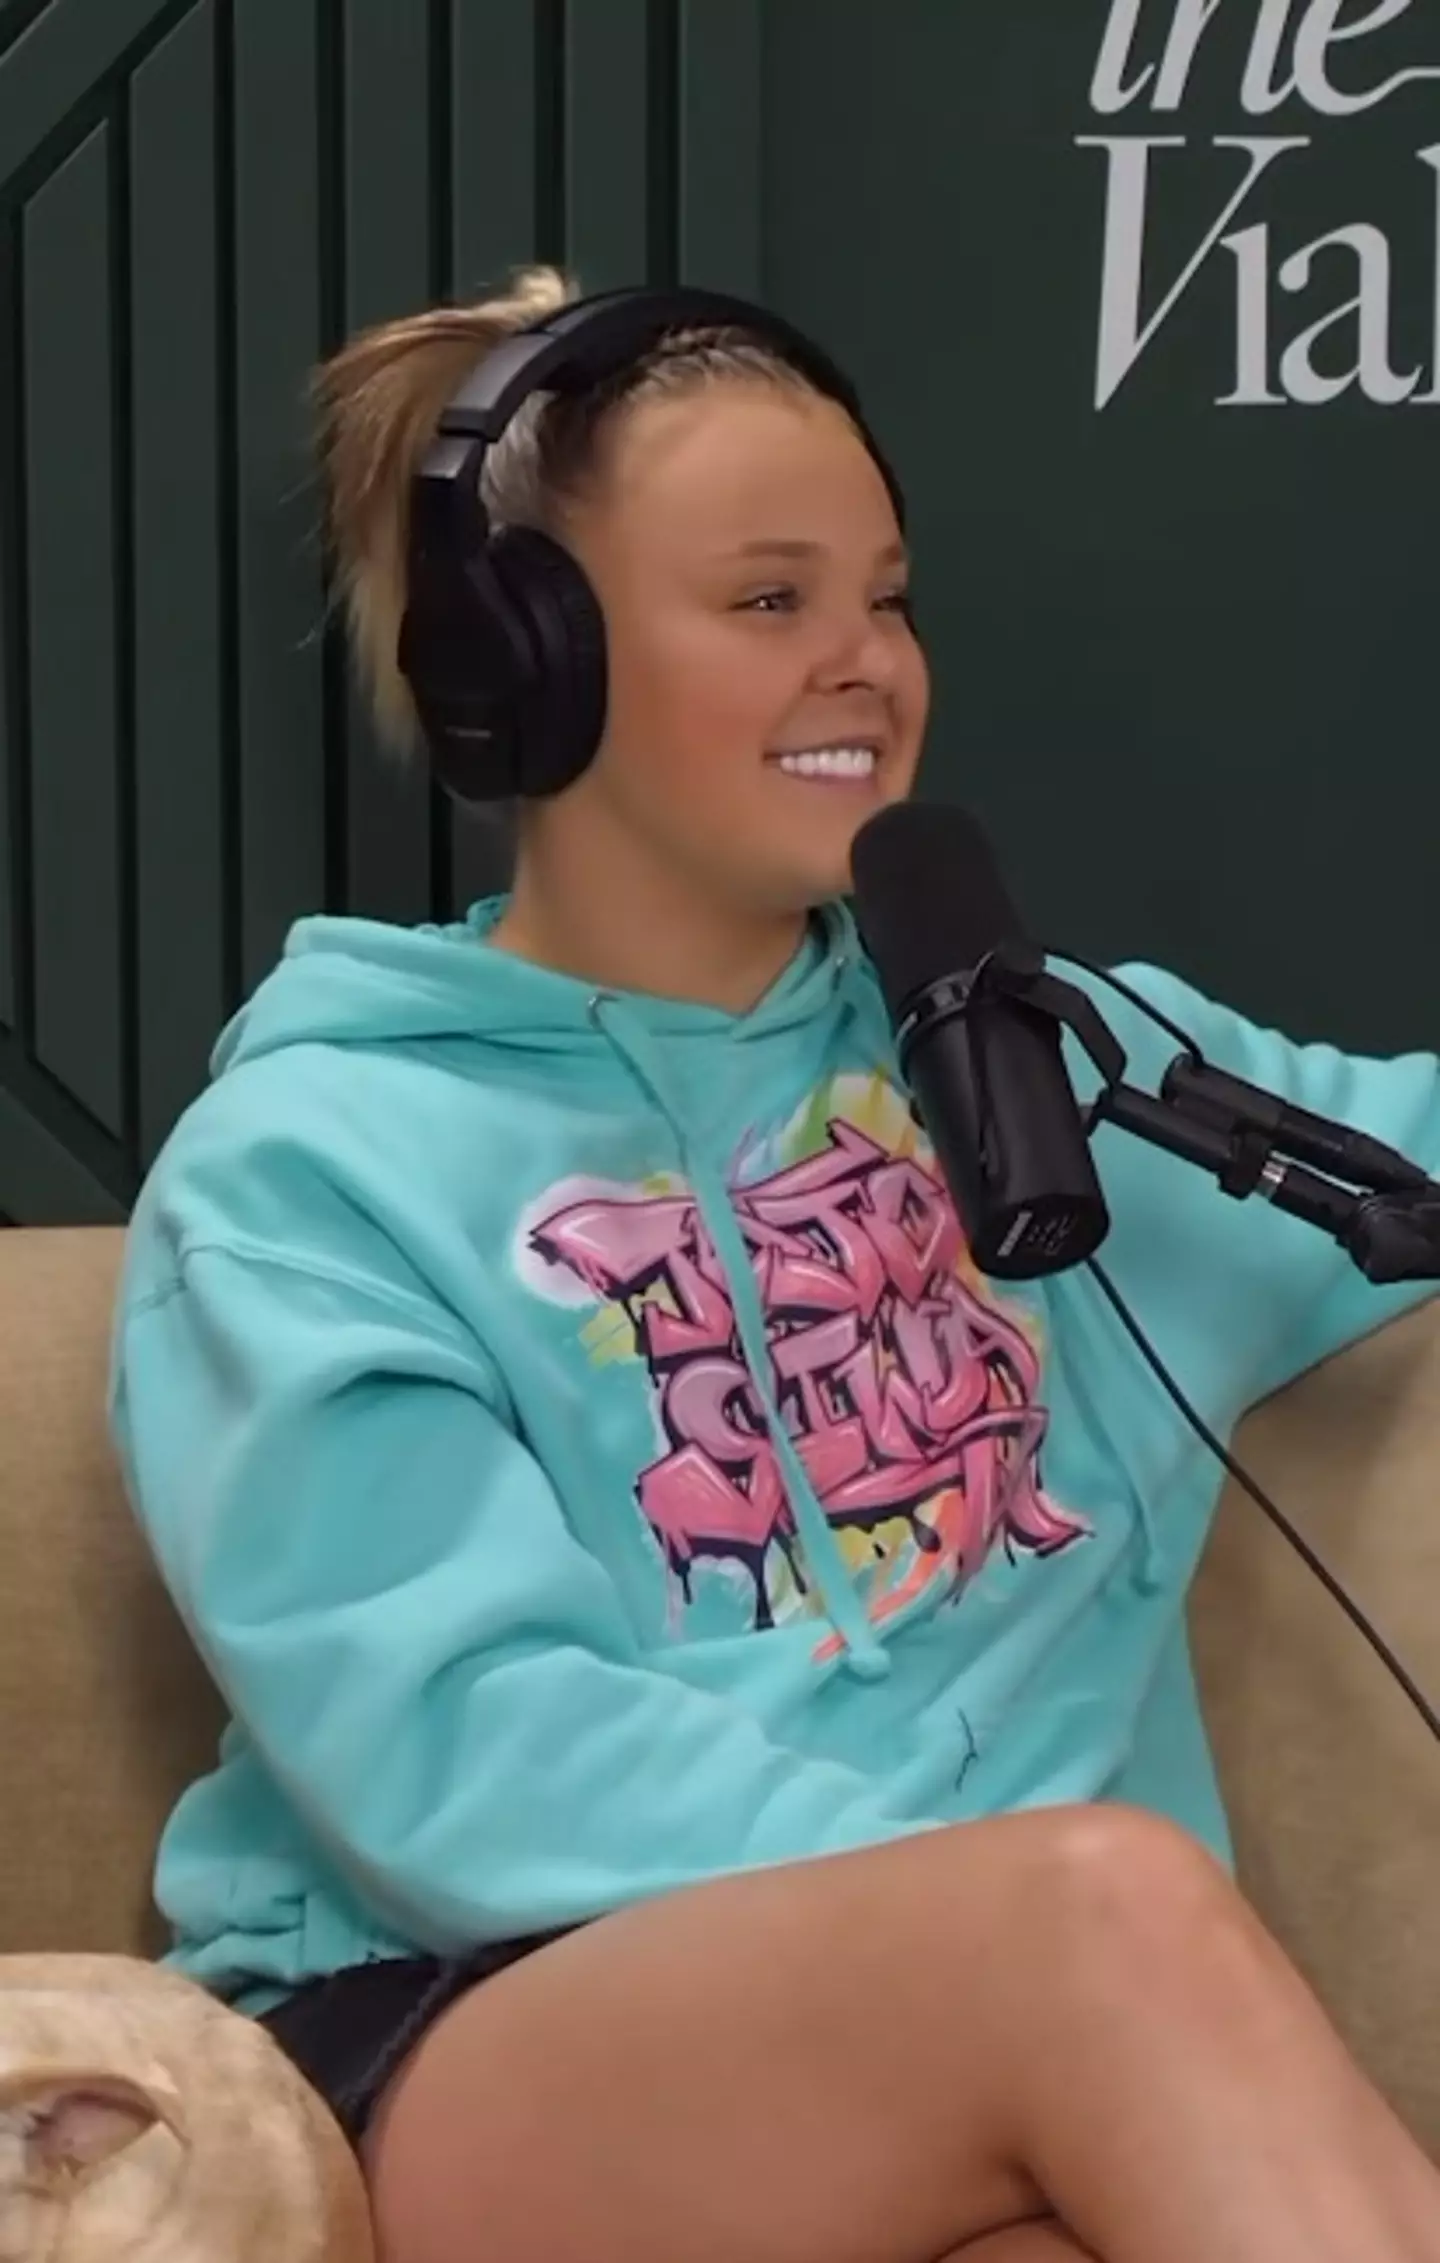 JoJo Siwa stood by her initial comments.